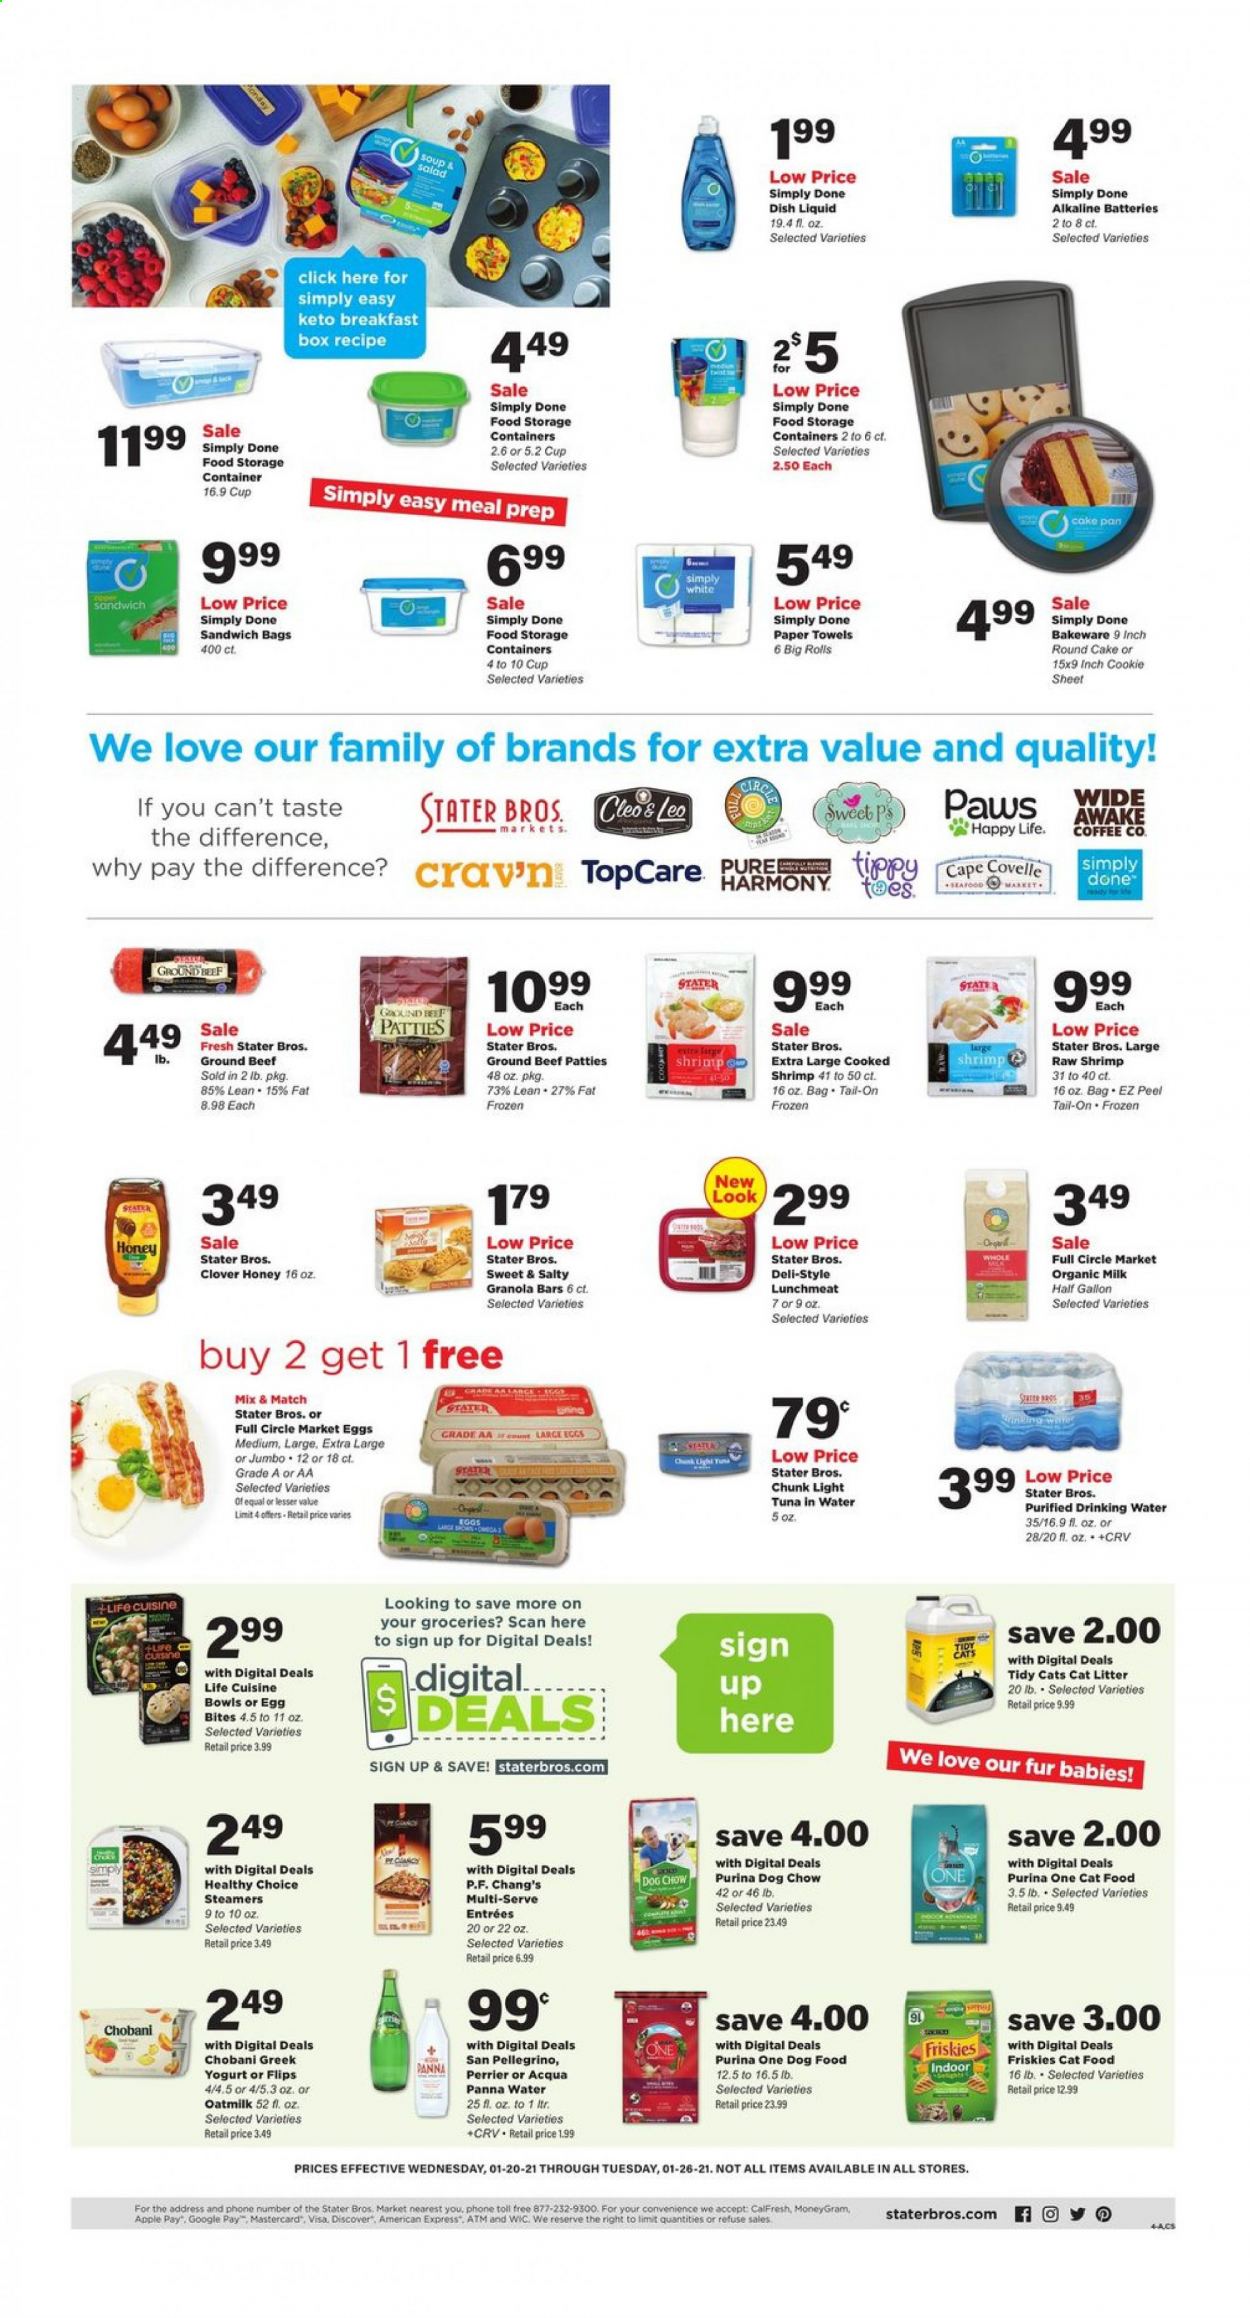 thumbnail - Stater Bros. Flyer - 01/20/2021 - 01/26/2021 - Sales products - cupcake, cake, tuna, shrimps, sandwich, soup, salad, Healthy Choice, lunch meat, yoghurt, Clover, Chobani, organic milk, oat milk, large eggs, tuna in water, light tuna, granola bar, honey, Perrier, coffee, beef meat, ground beef, kitchen towels, paper towels, dishwashing liquid, pan, cake pan, cup, bakeware, battery, alkaline batteries, cat litter, Paws, animal food, cat food, dog food, Dog Chow, Purina, Friskies. Page 4.